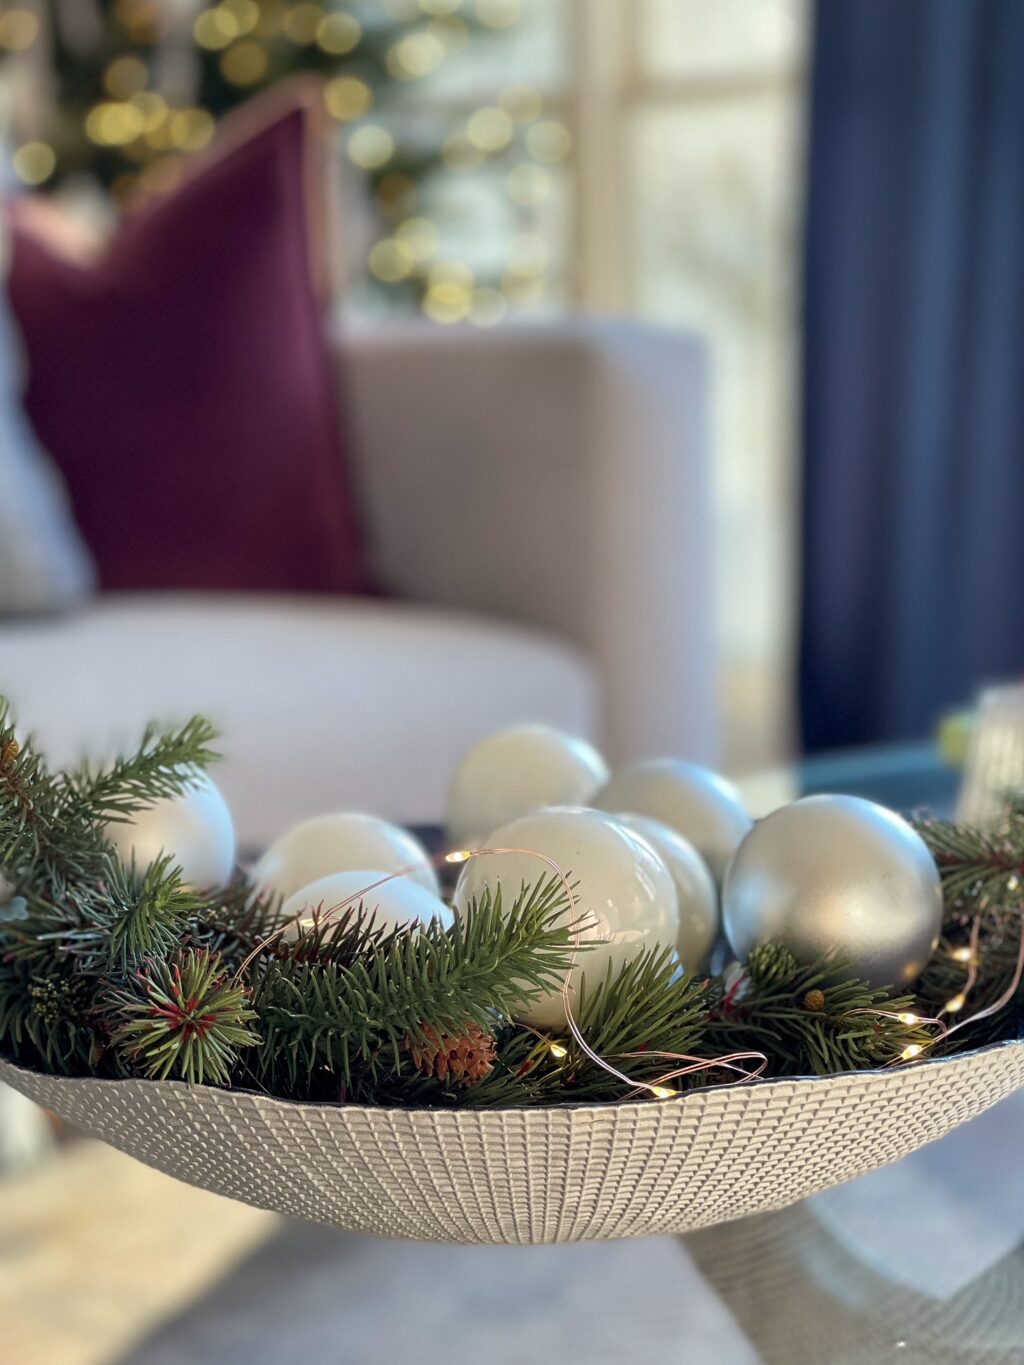 Bowl filled with evergreen and white and silver balls and fairy lights